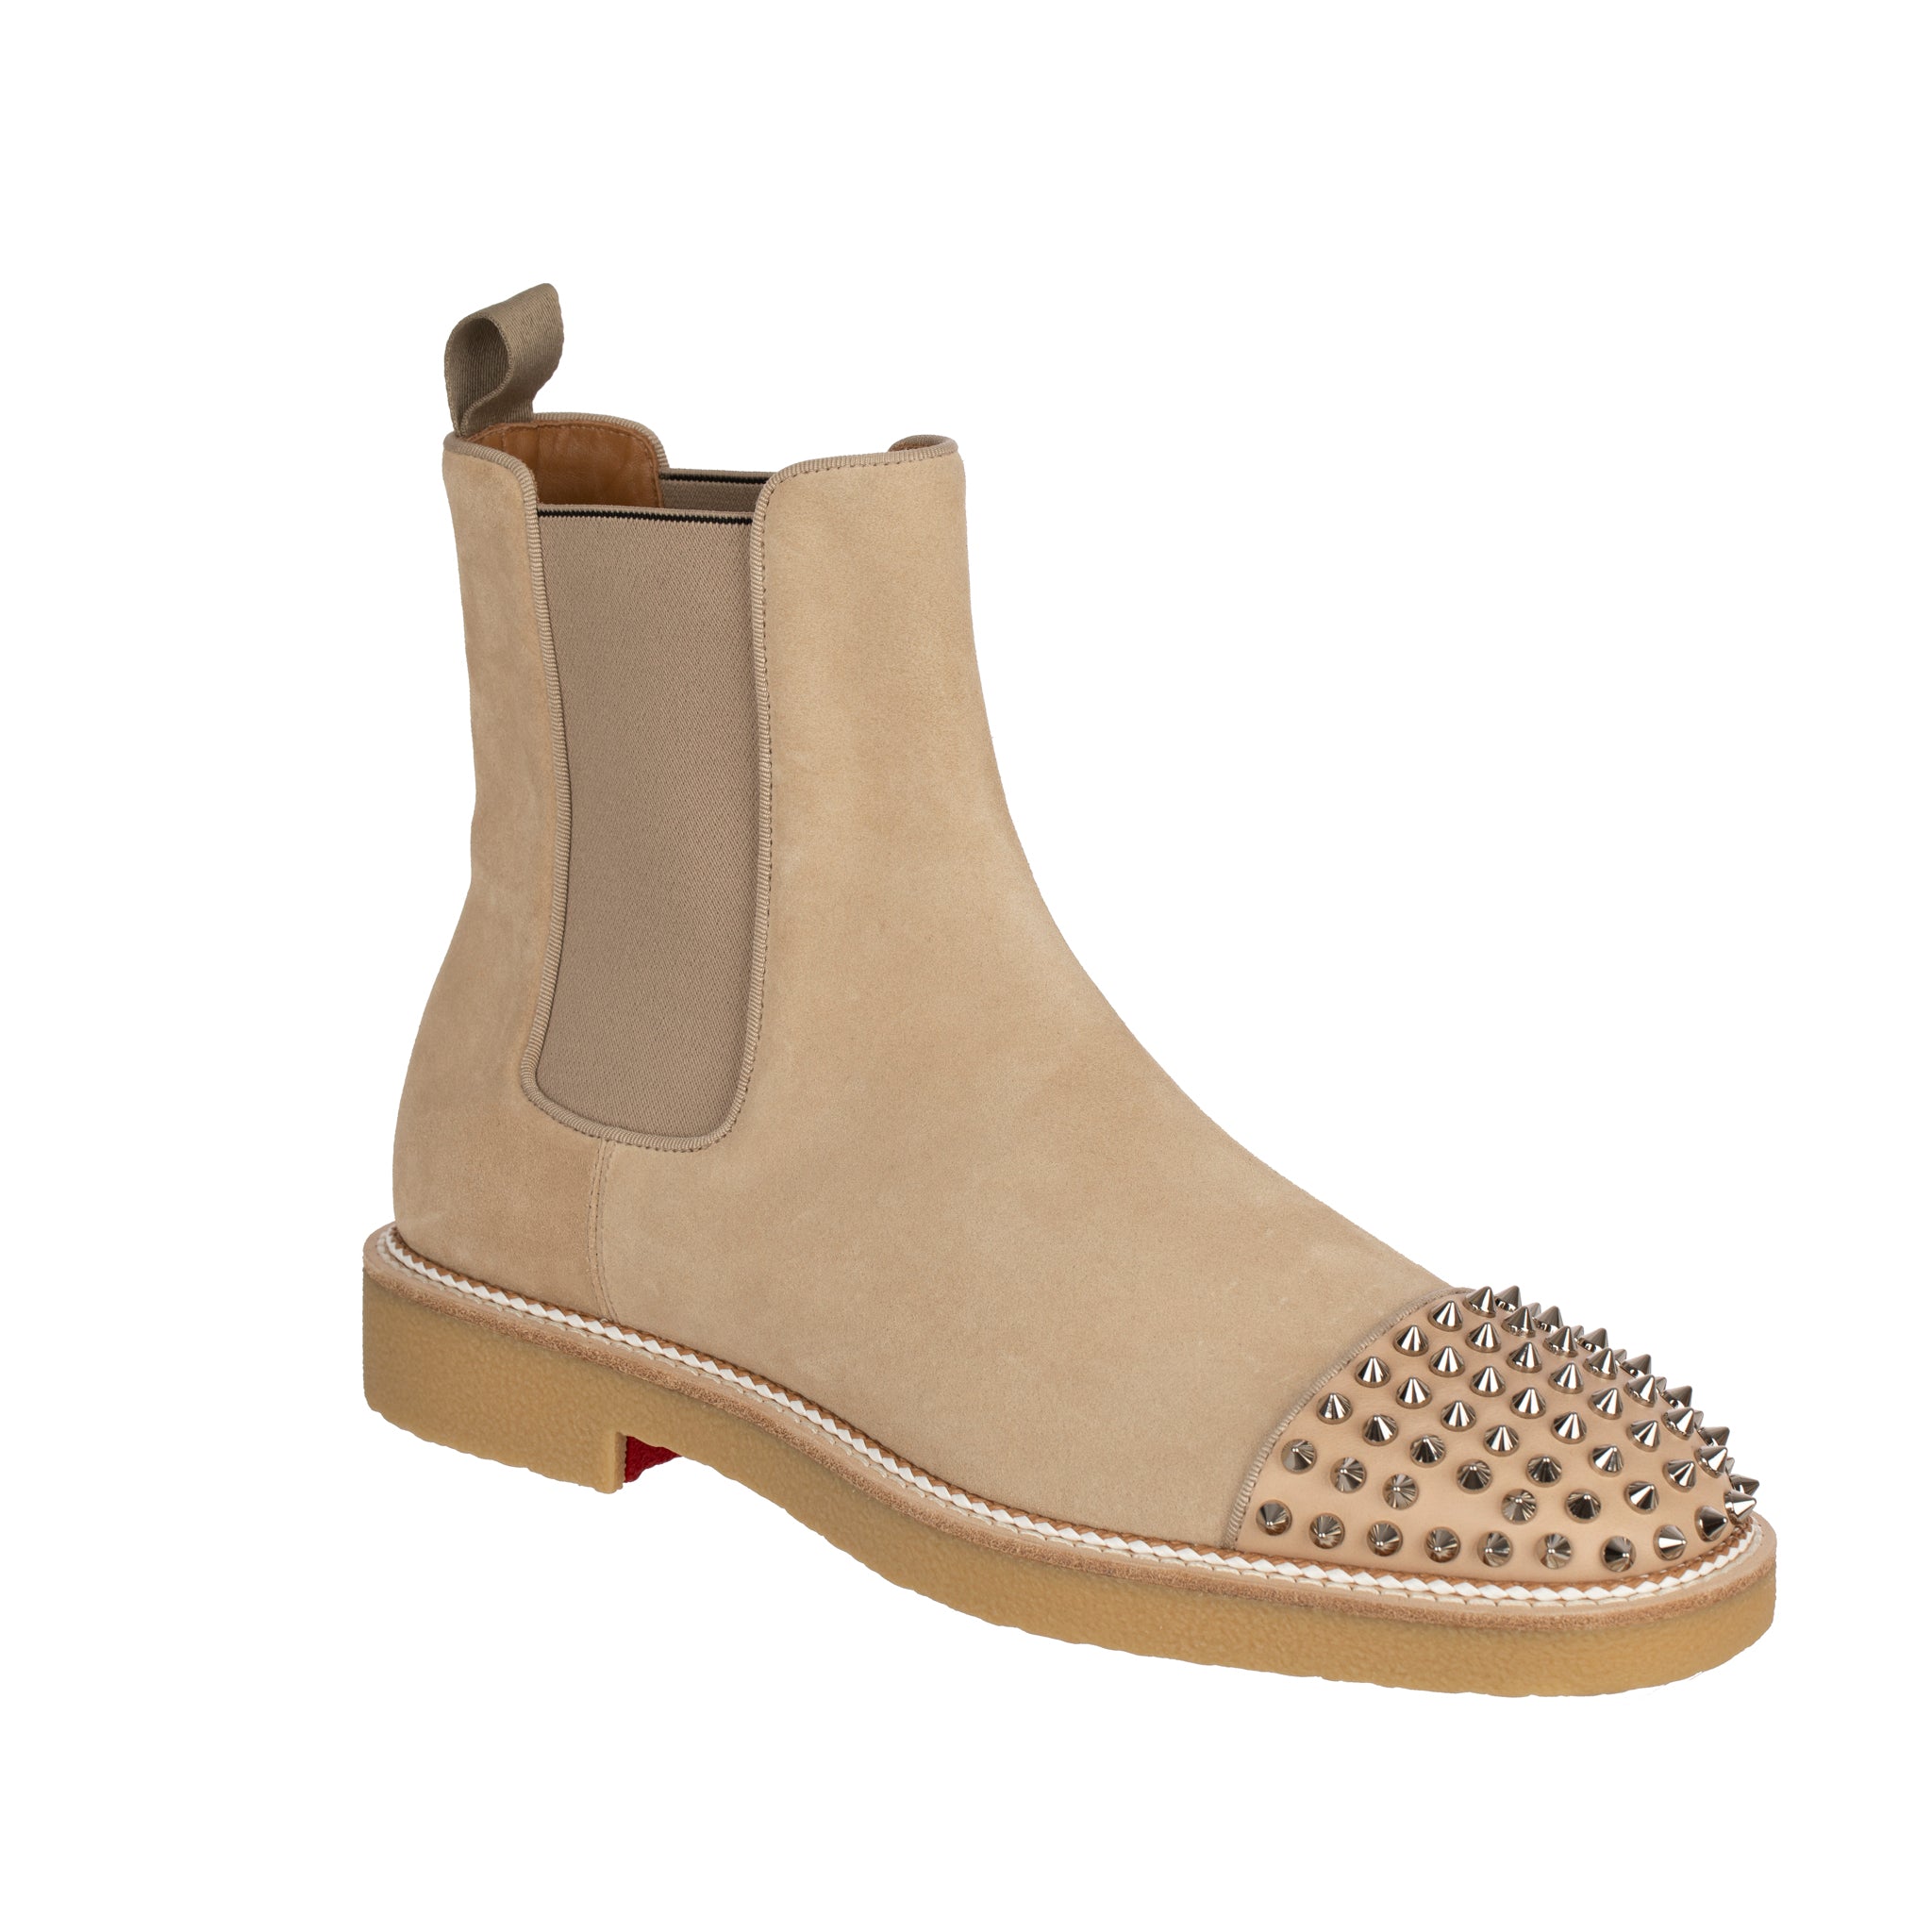 Christian Louboutin Mens Beige Suede Boots With Studs 41.5 FR